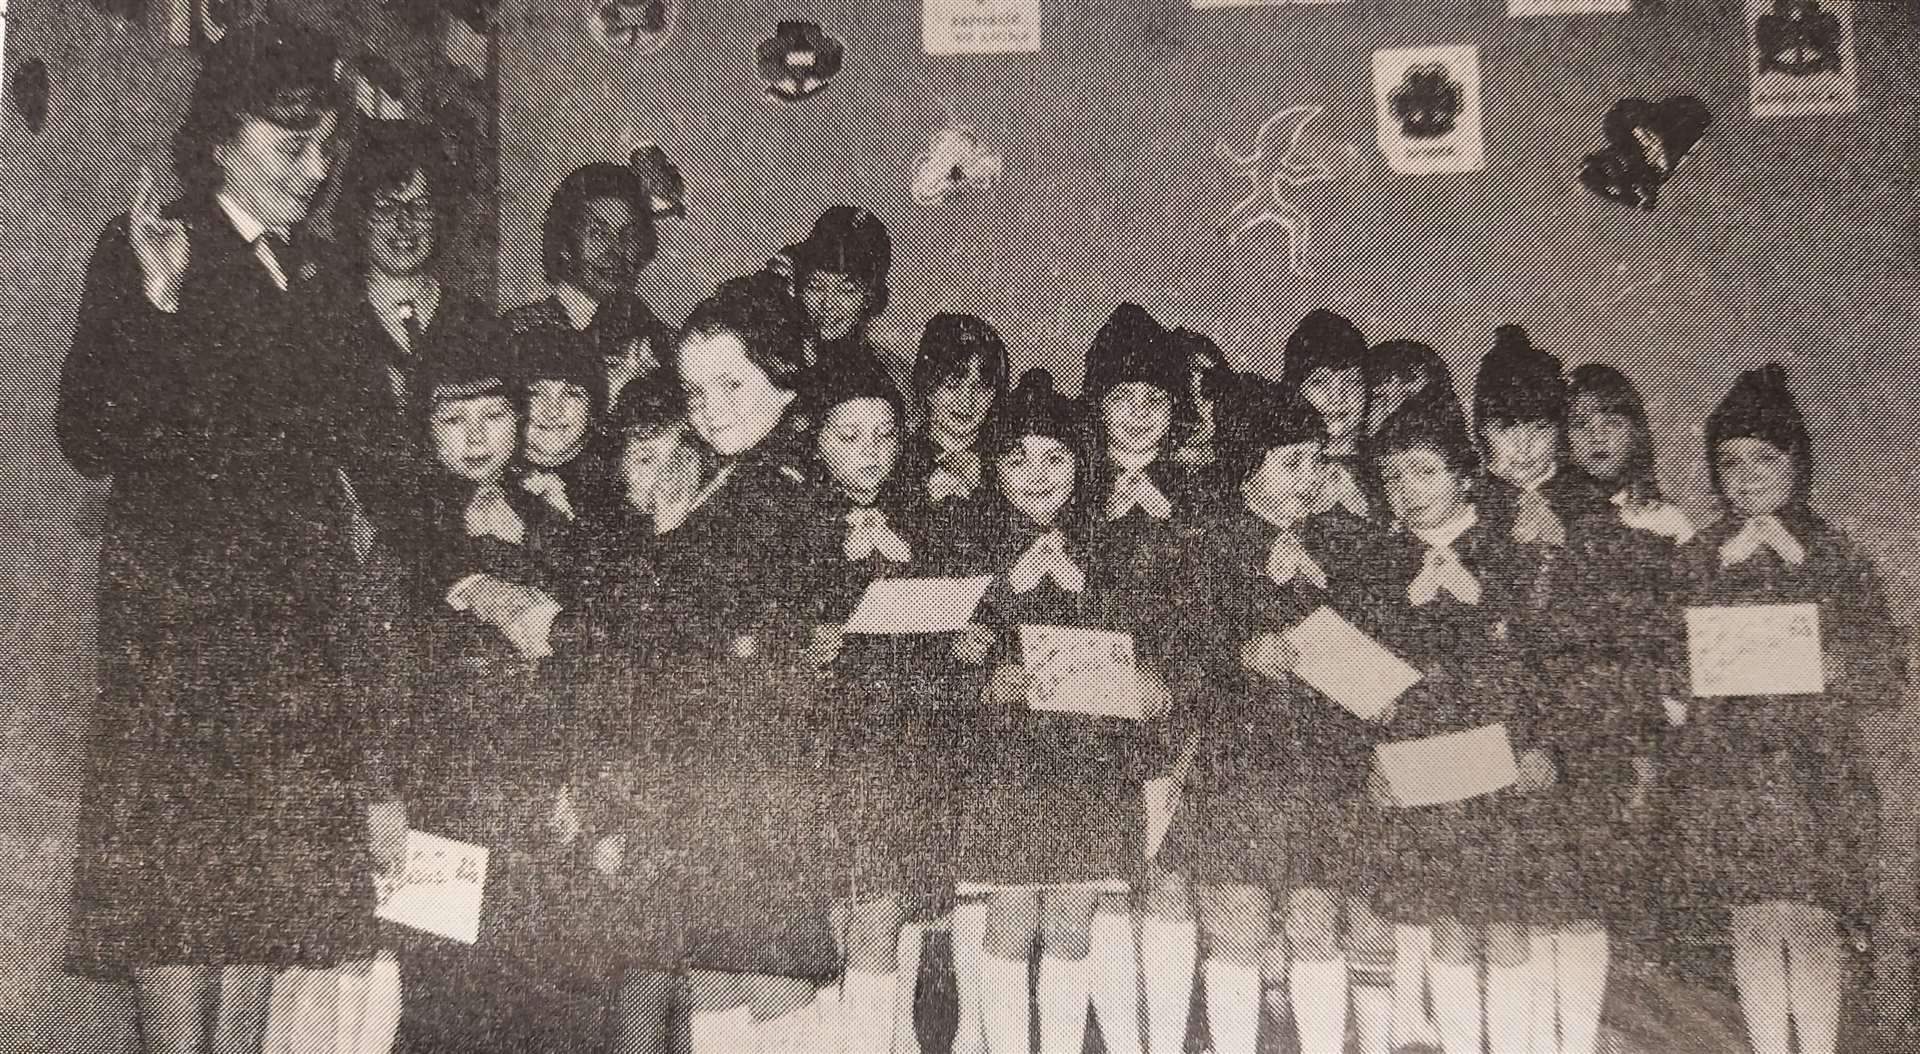 21 Brownies joined the newly formed 4th Ellon Brownies with district commissioner Margaret Davidson. (Ellon Advertiser 1979)